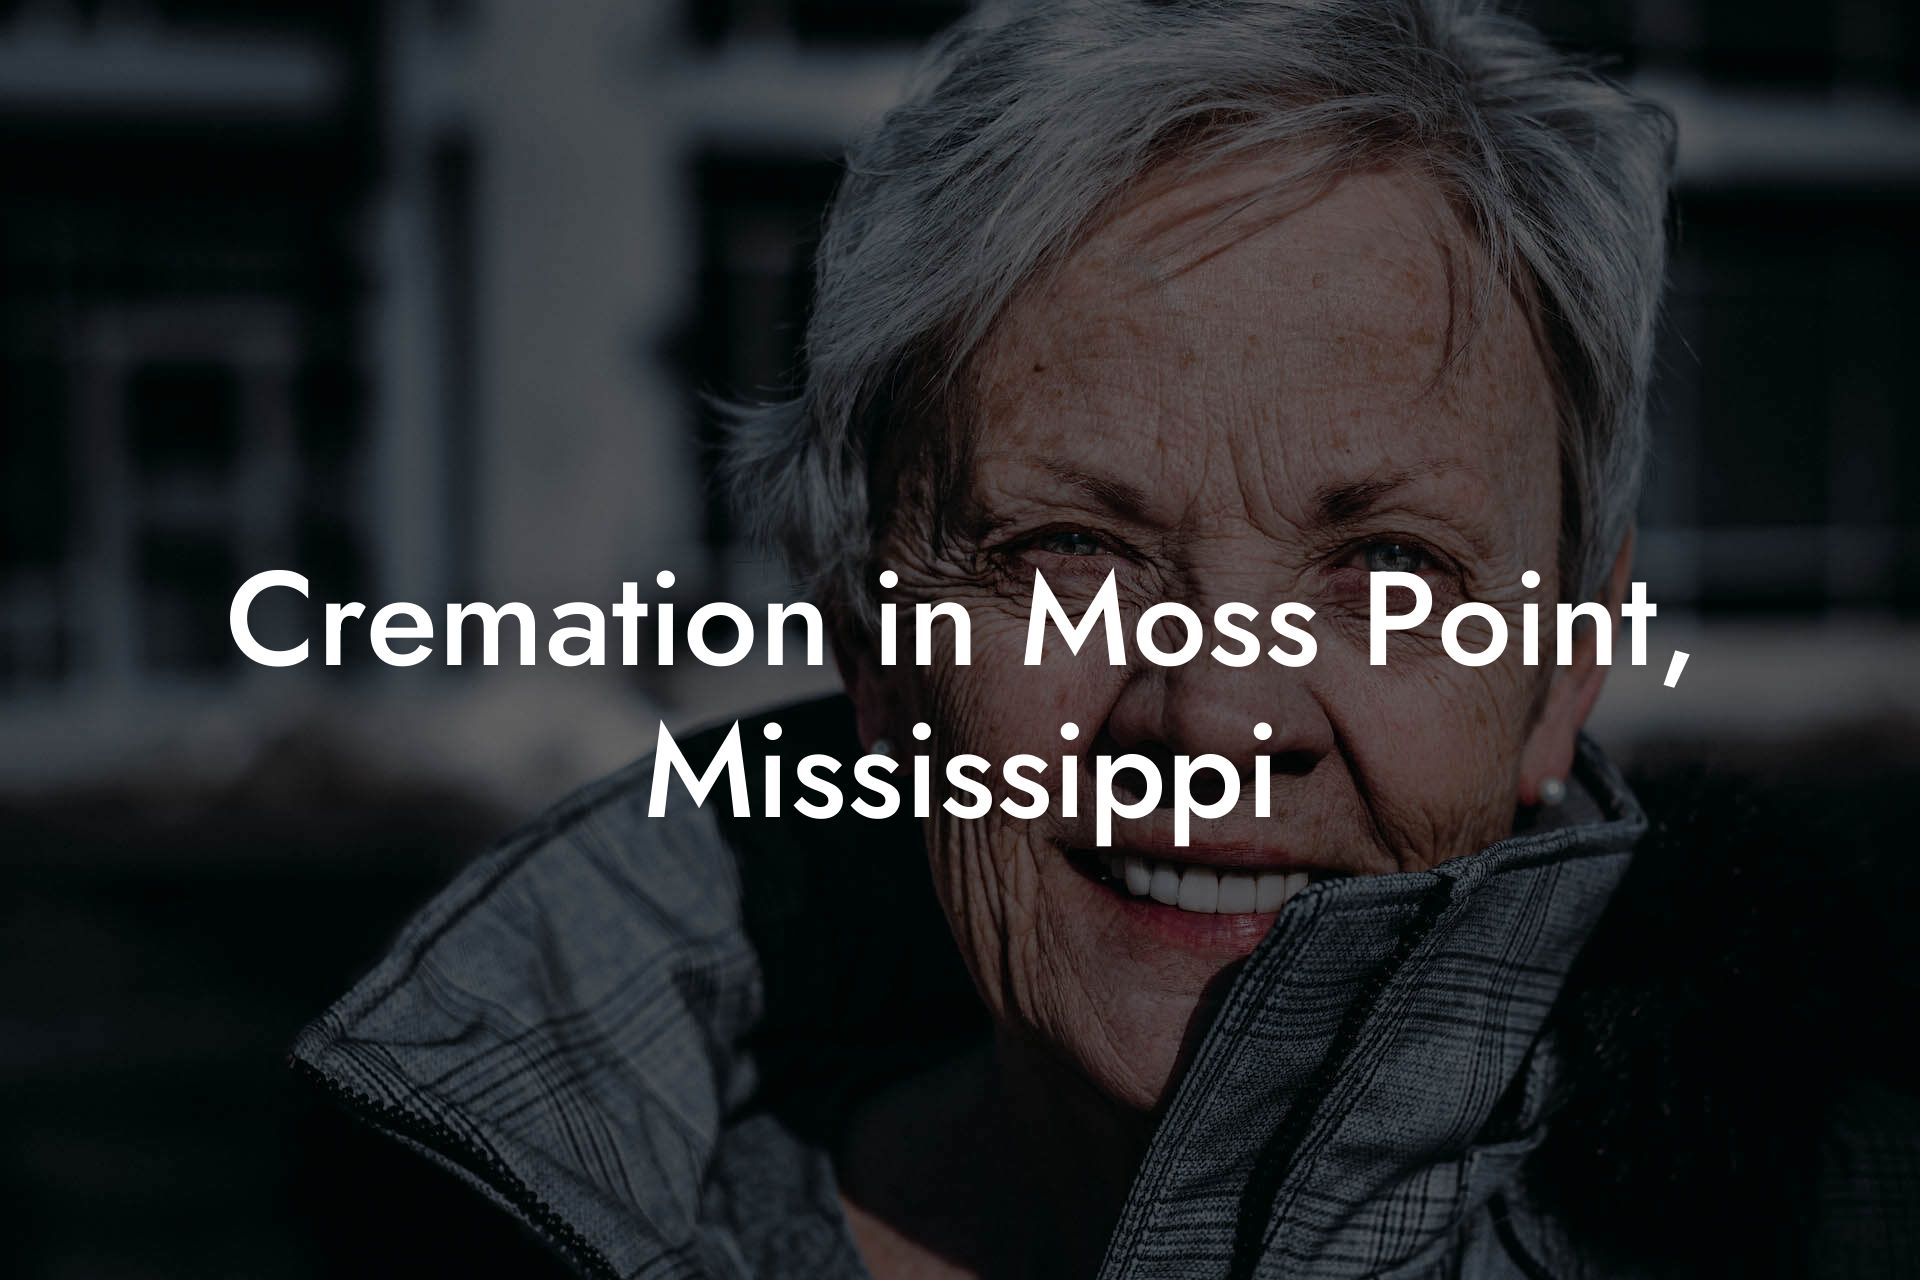 Cremation in Moss Point, Mississippi